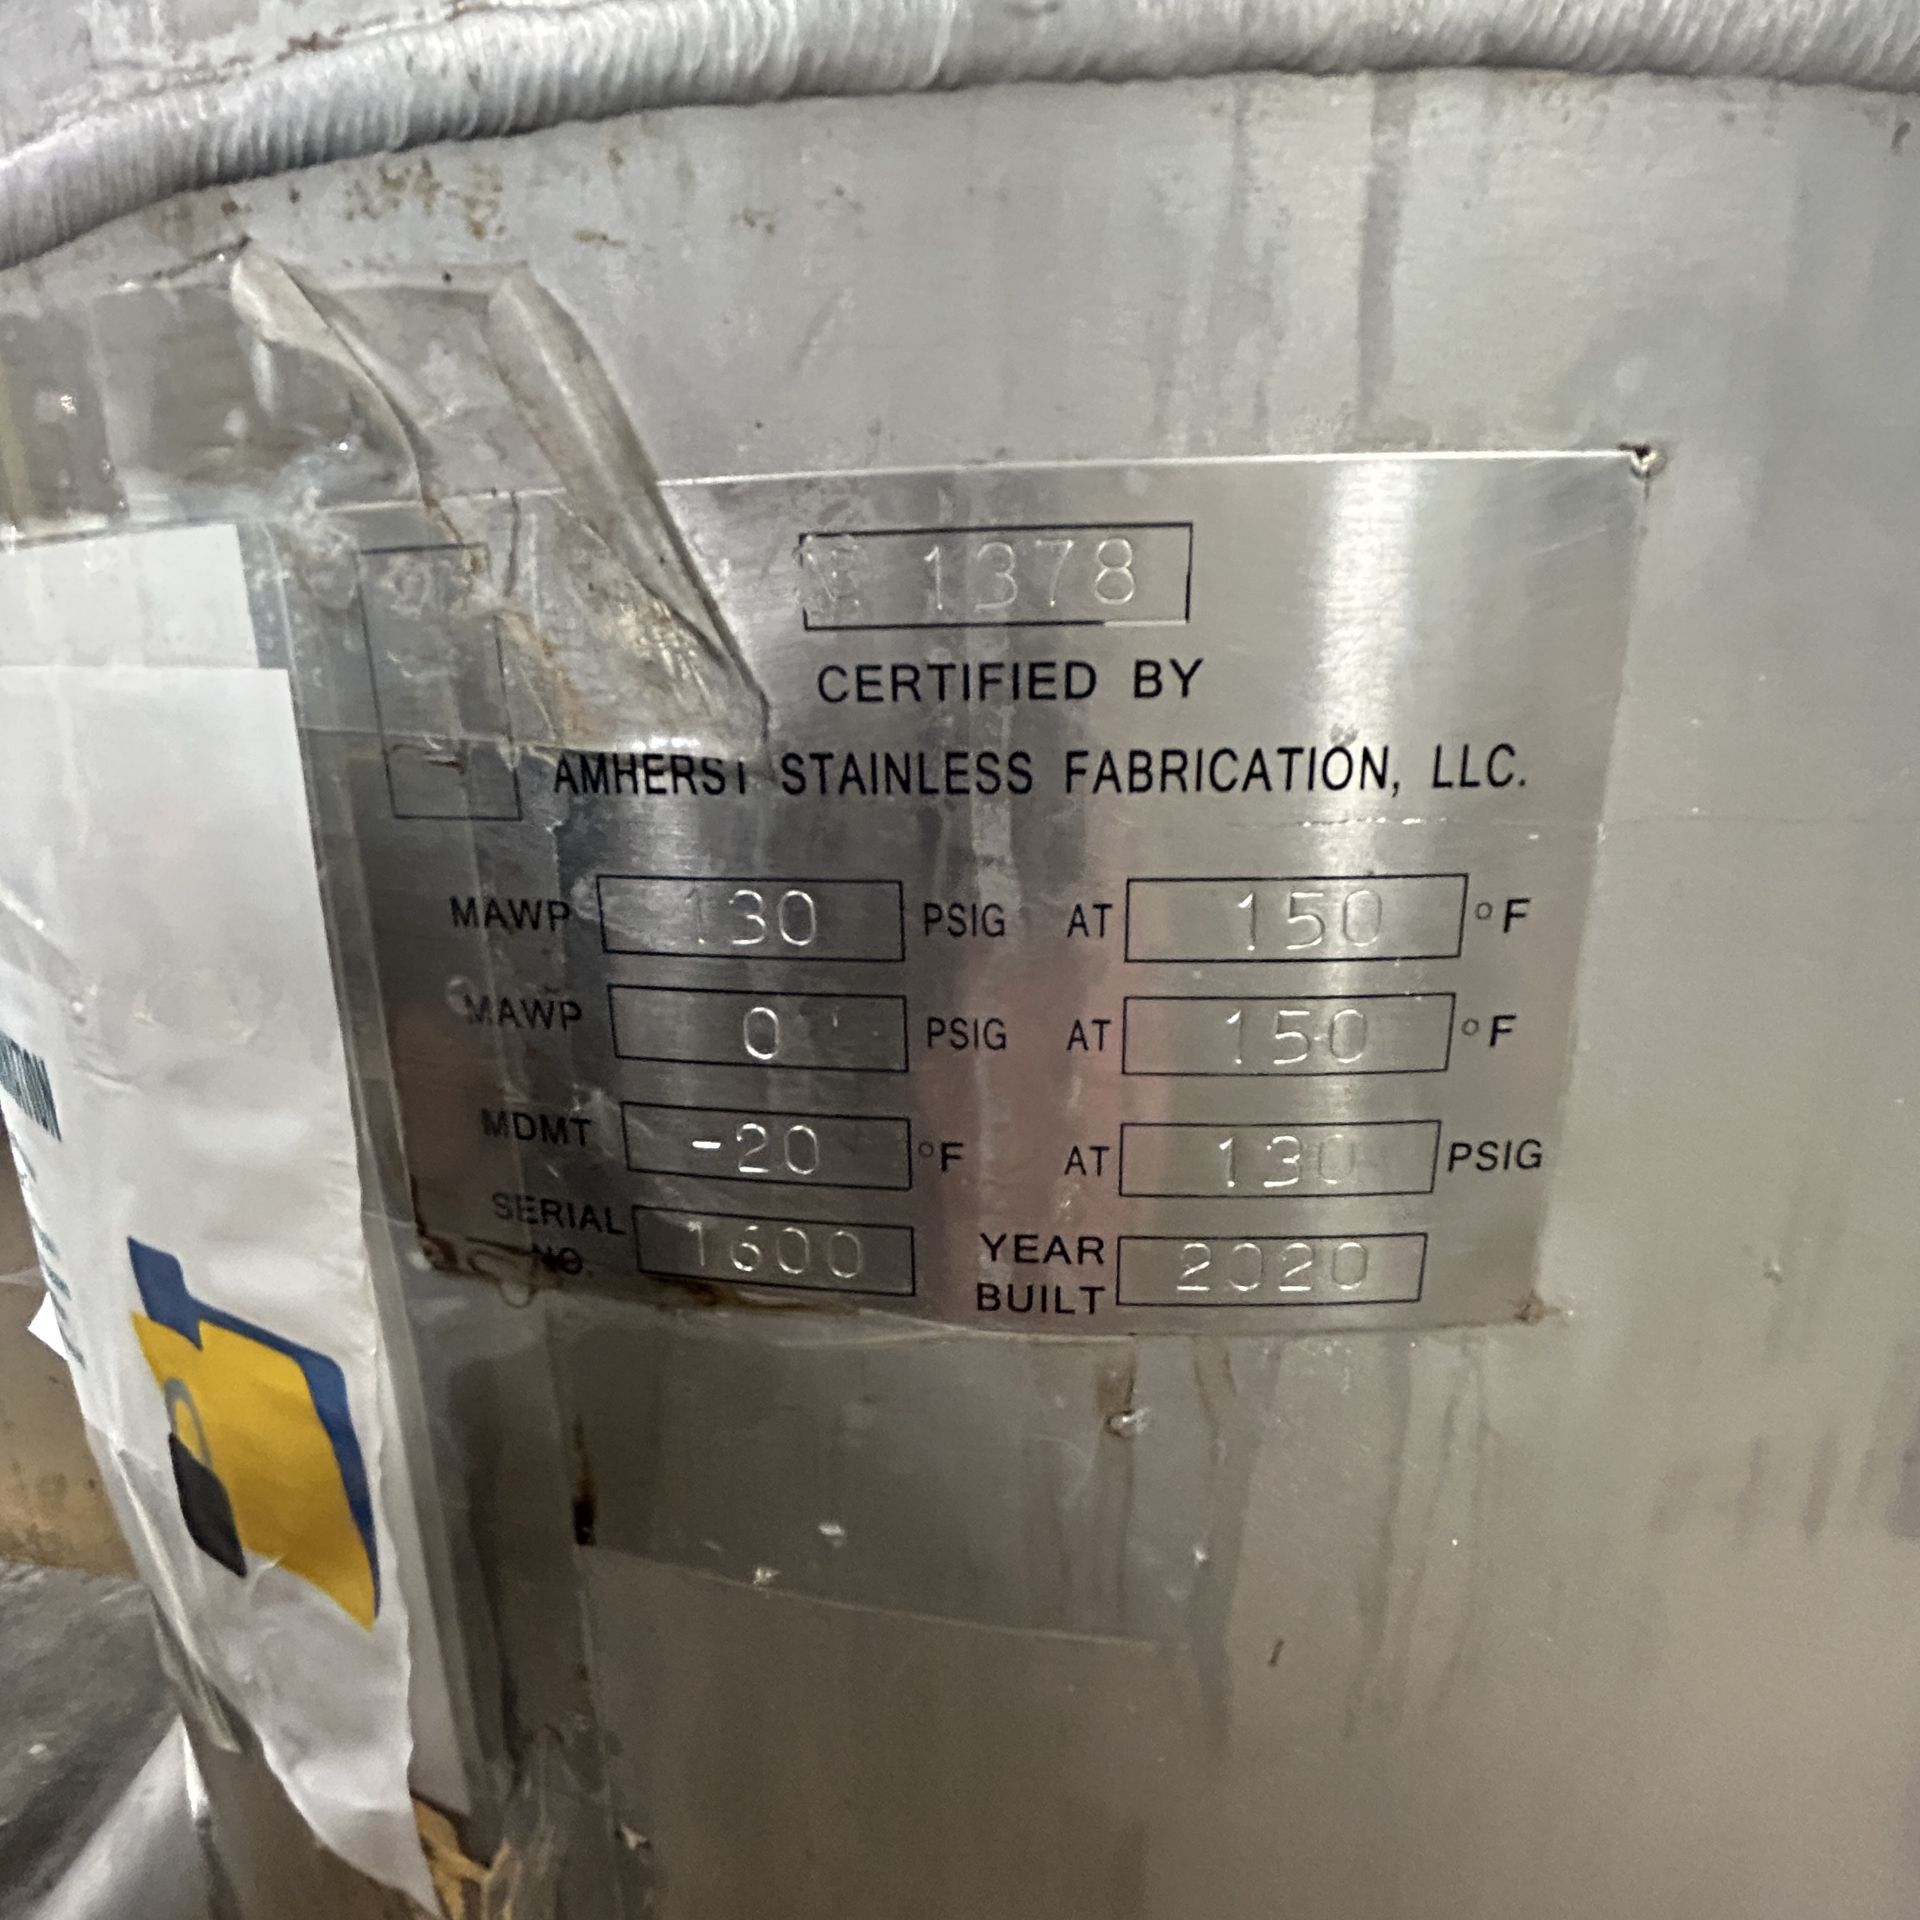 2020 Amherst Stainless Steel Agitation Pressure Pot - Image 11 of 11